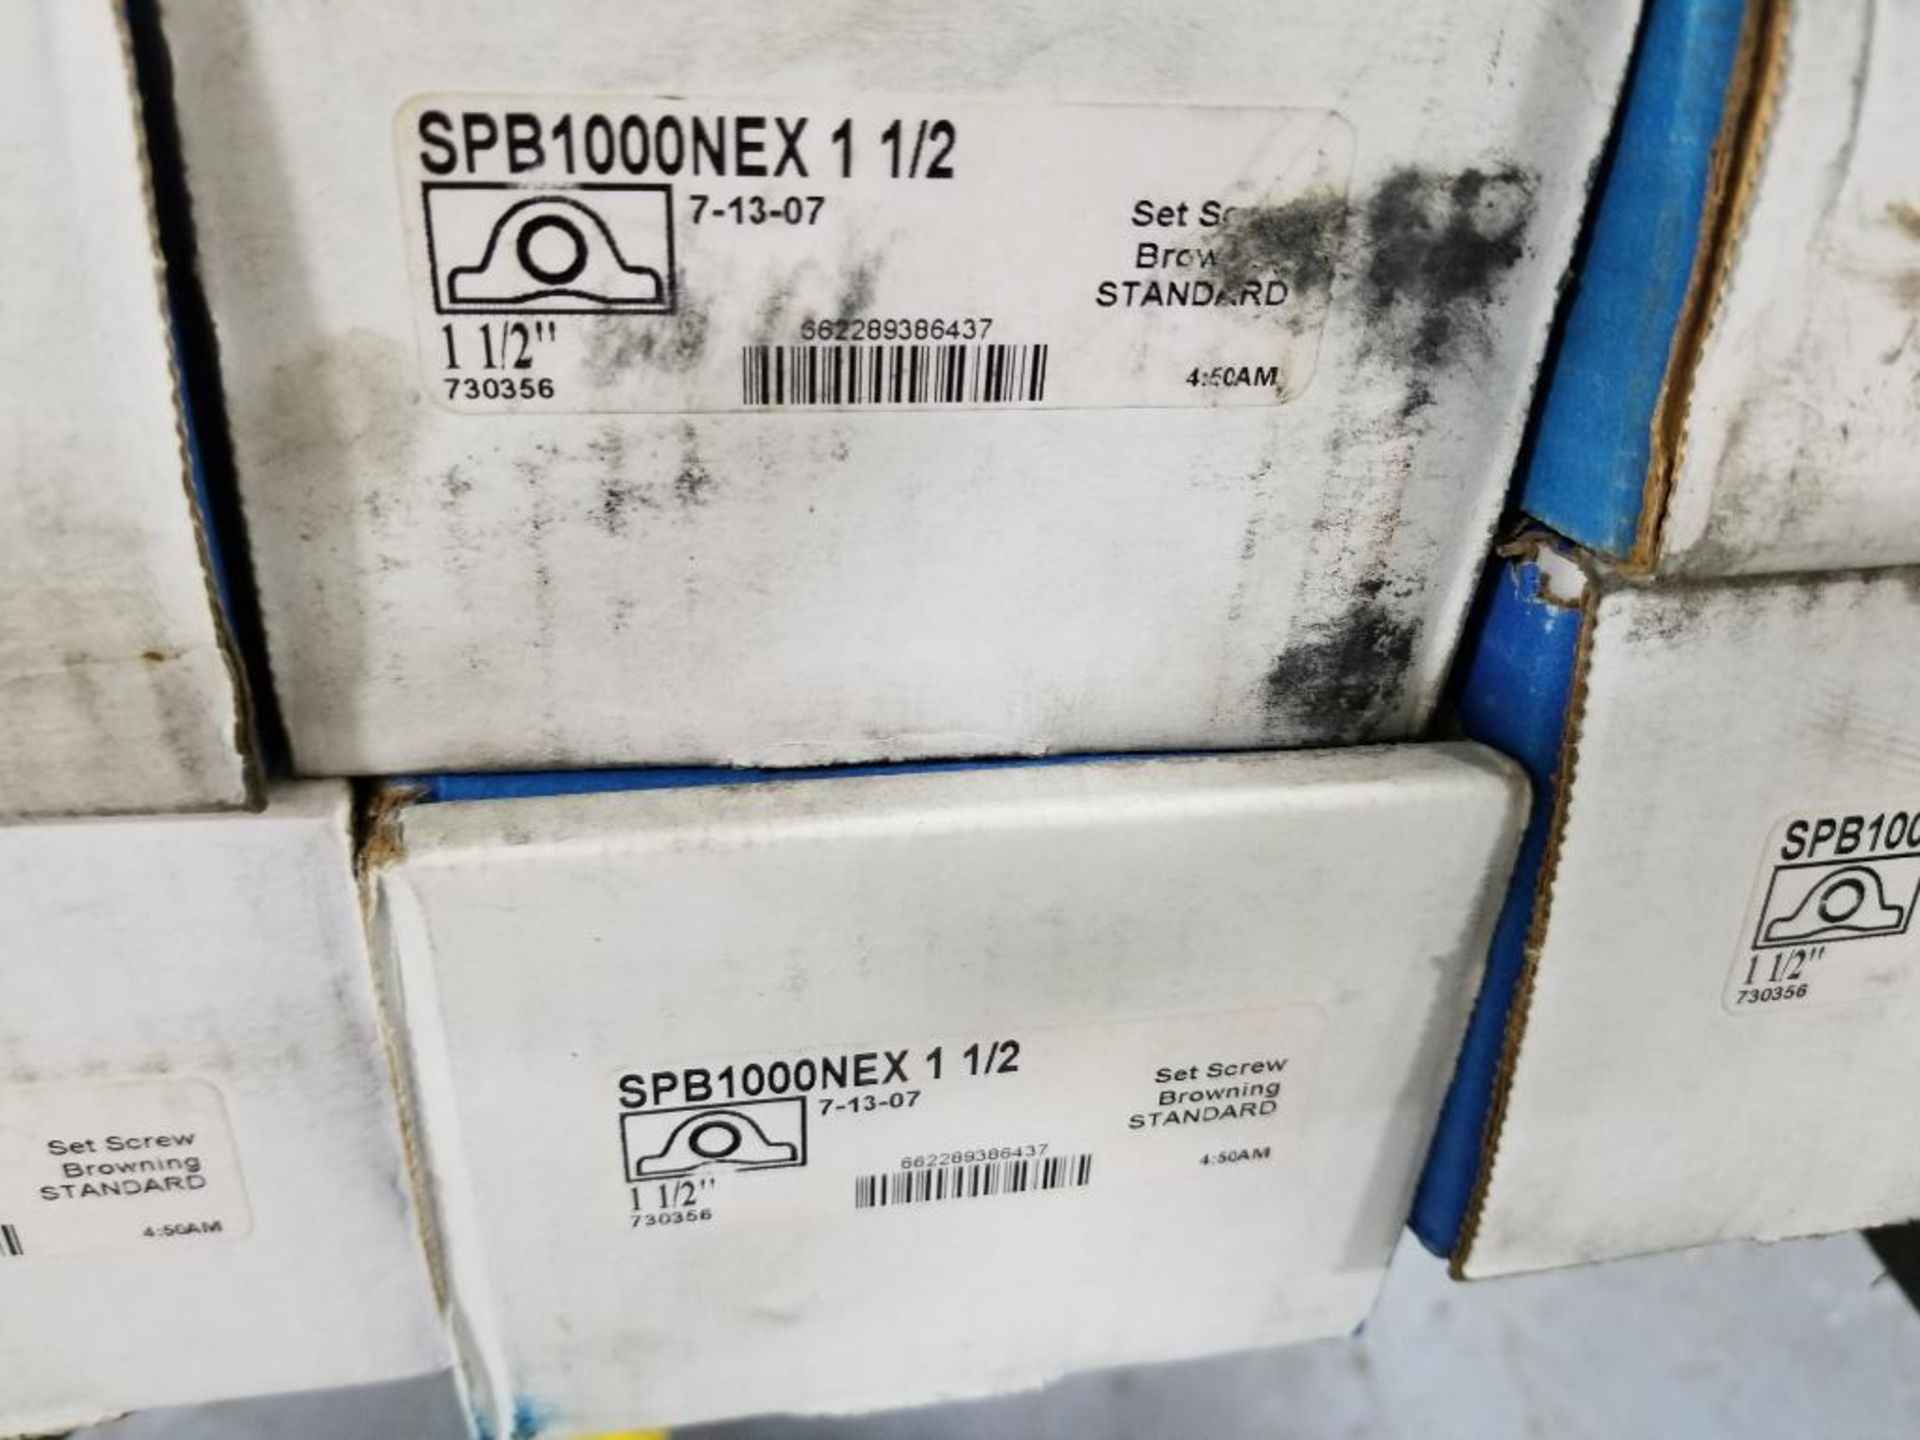 Qty 6 - Browning bearings. Part number SPB1000NEX-1-1/2. - Image 4 of 5